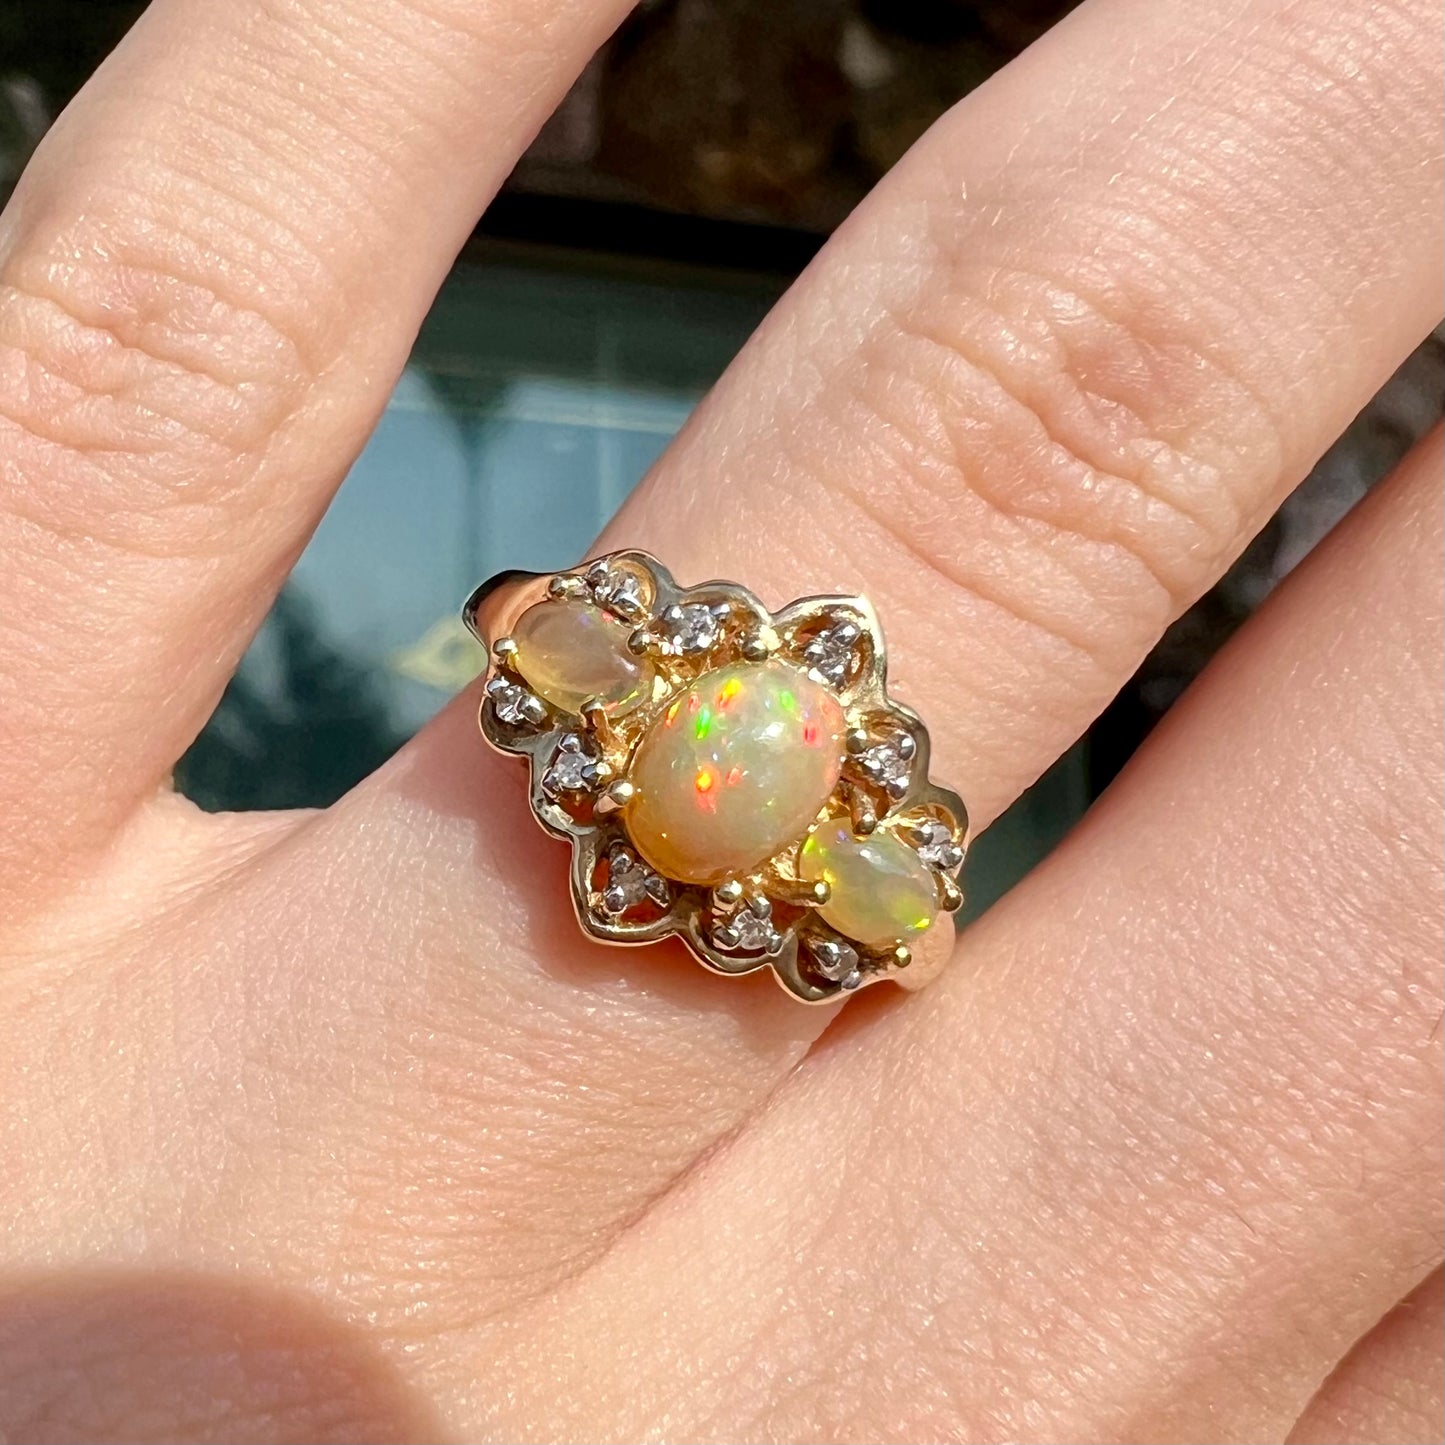 A three-stone gold ring set with Ethiopian fire opals and diamond accents.